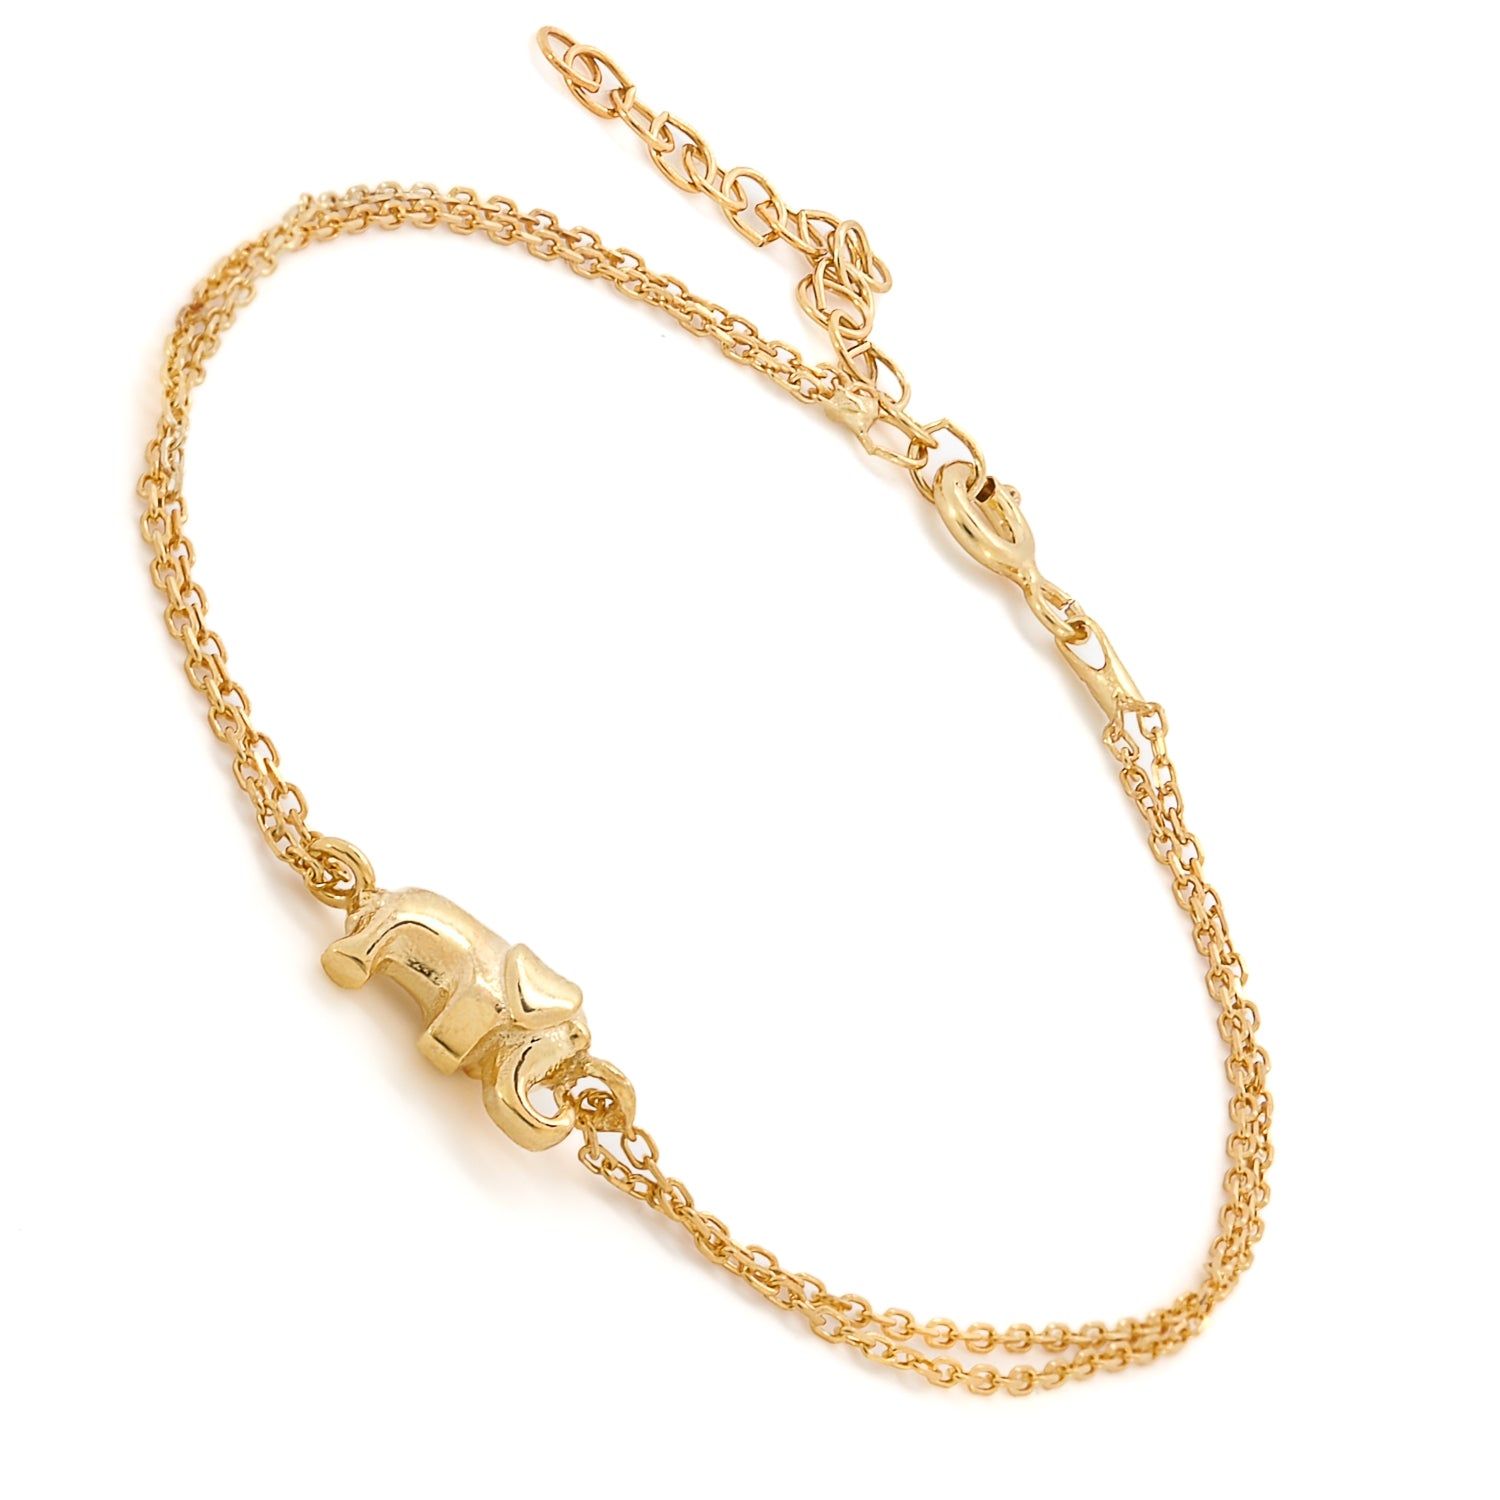 Strength and luck unite in Dainty Gold Elephant Bracelet.